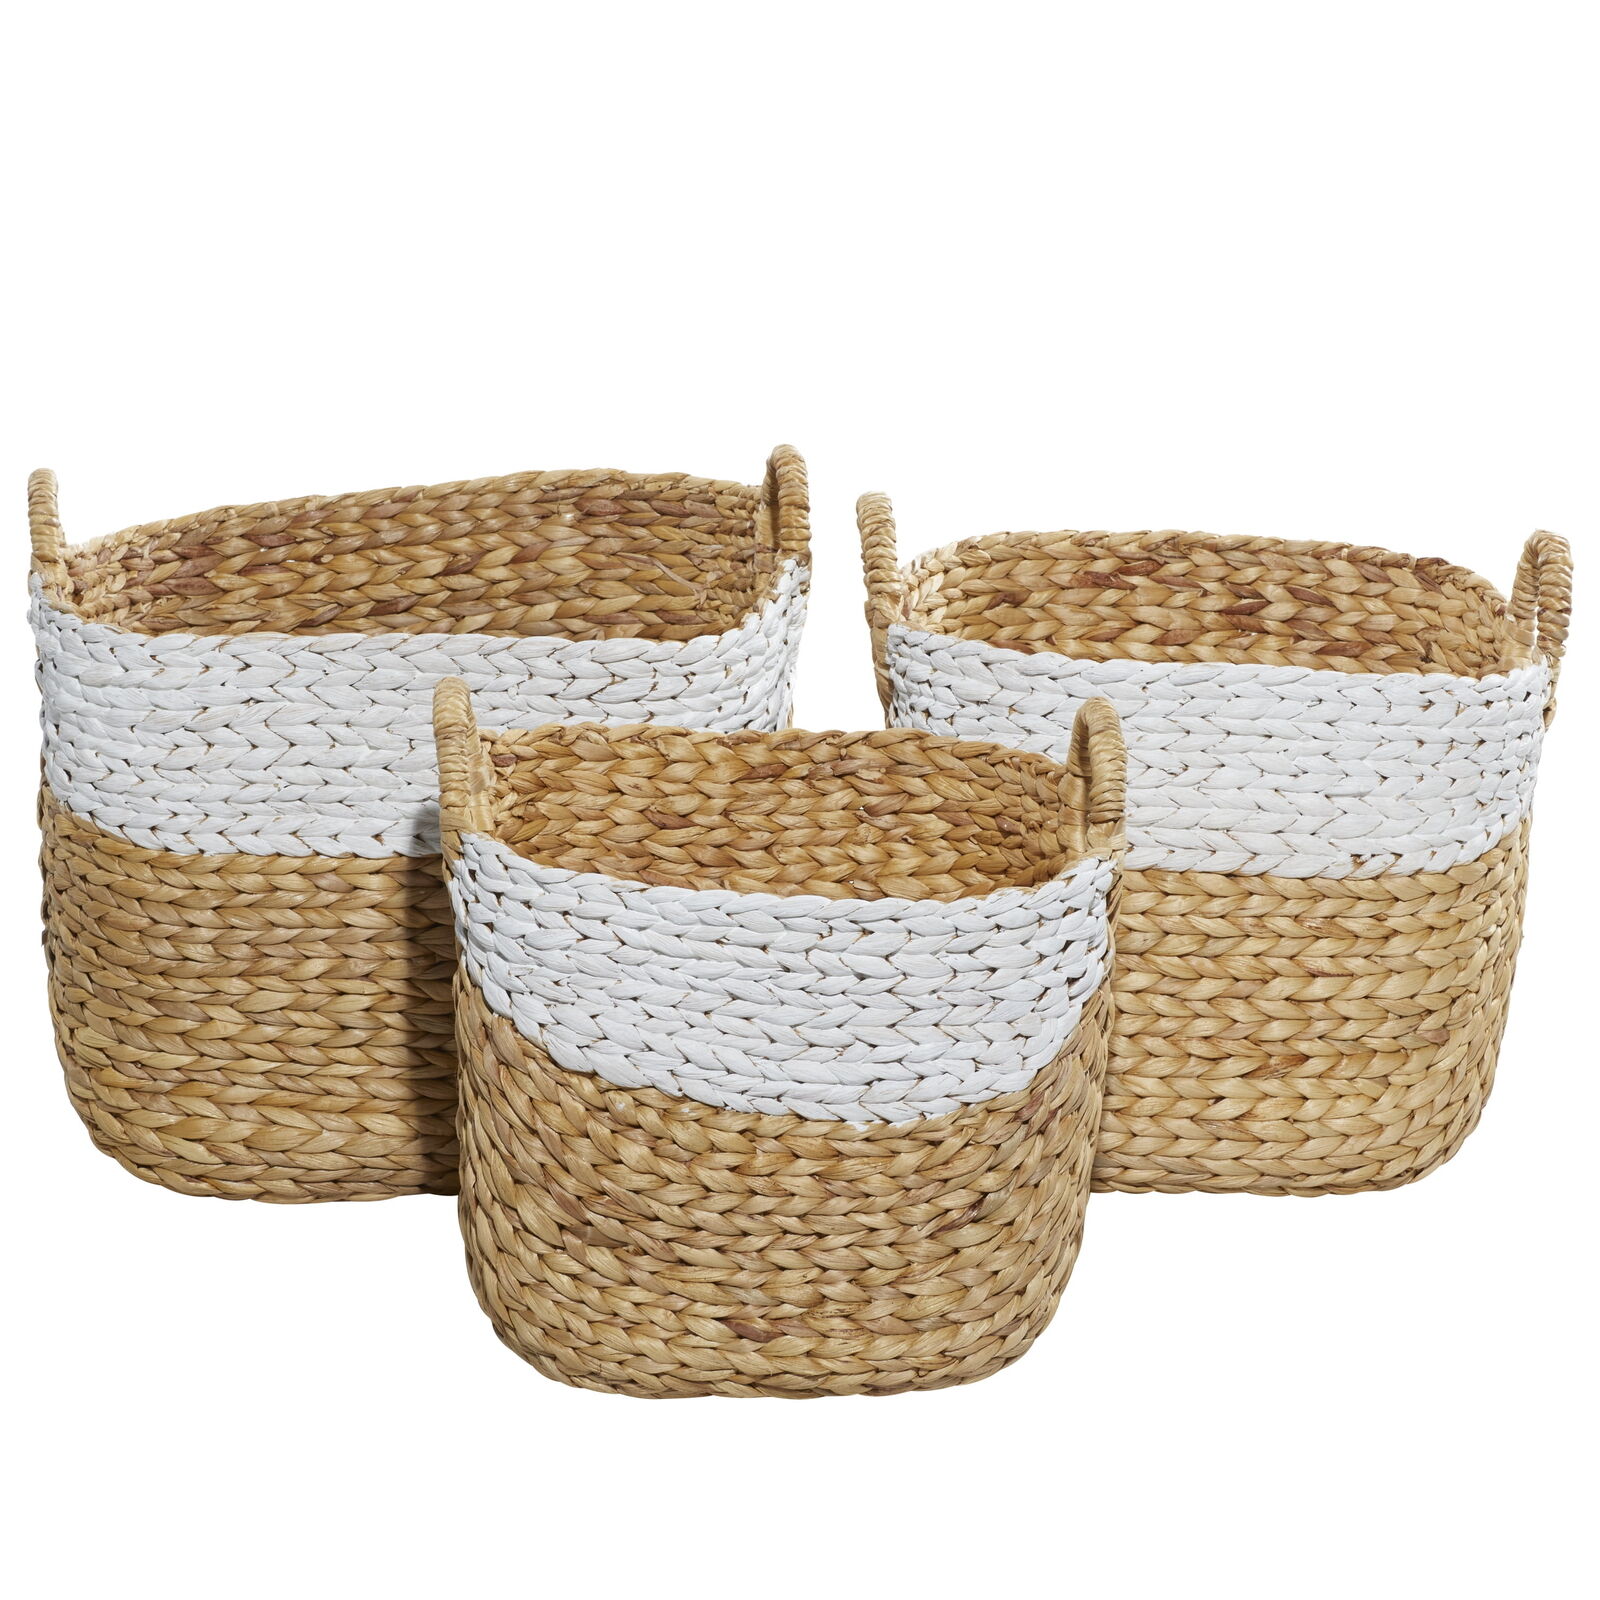 DecMode Brown Seagrass Handmade Two Toned Storage Basket with Handles-New